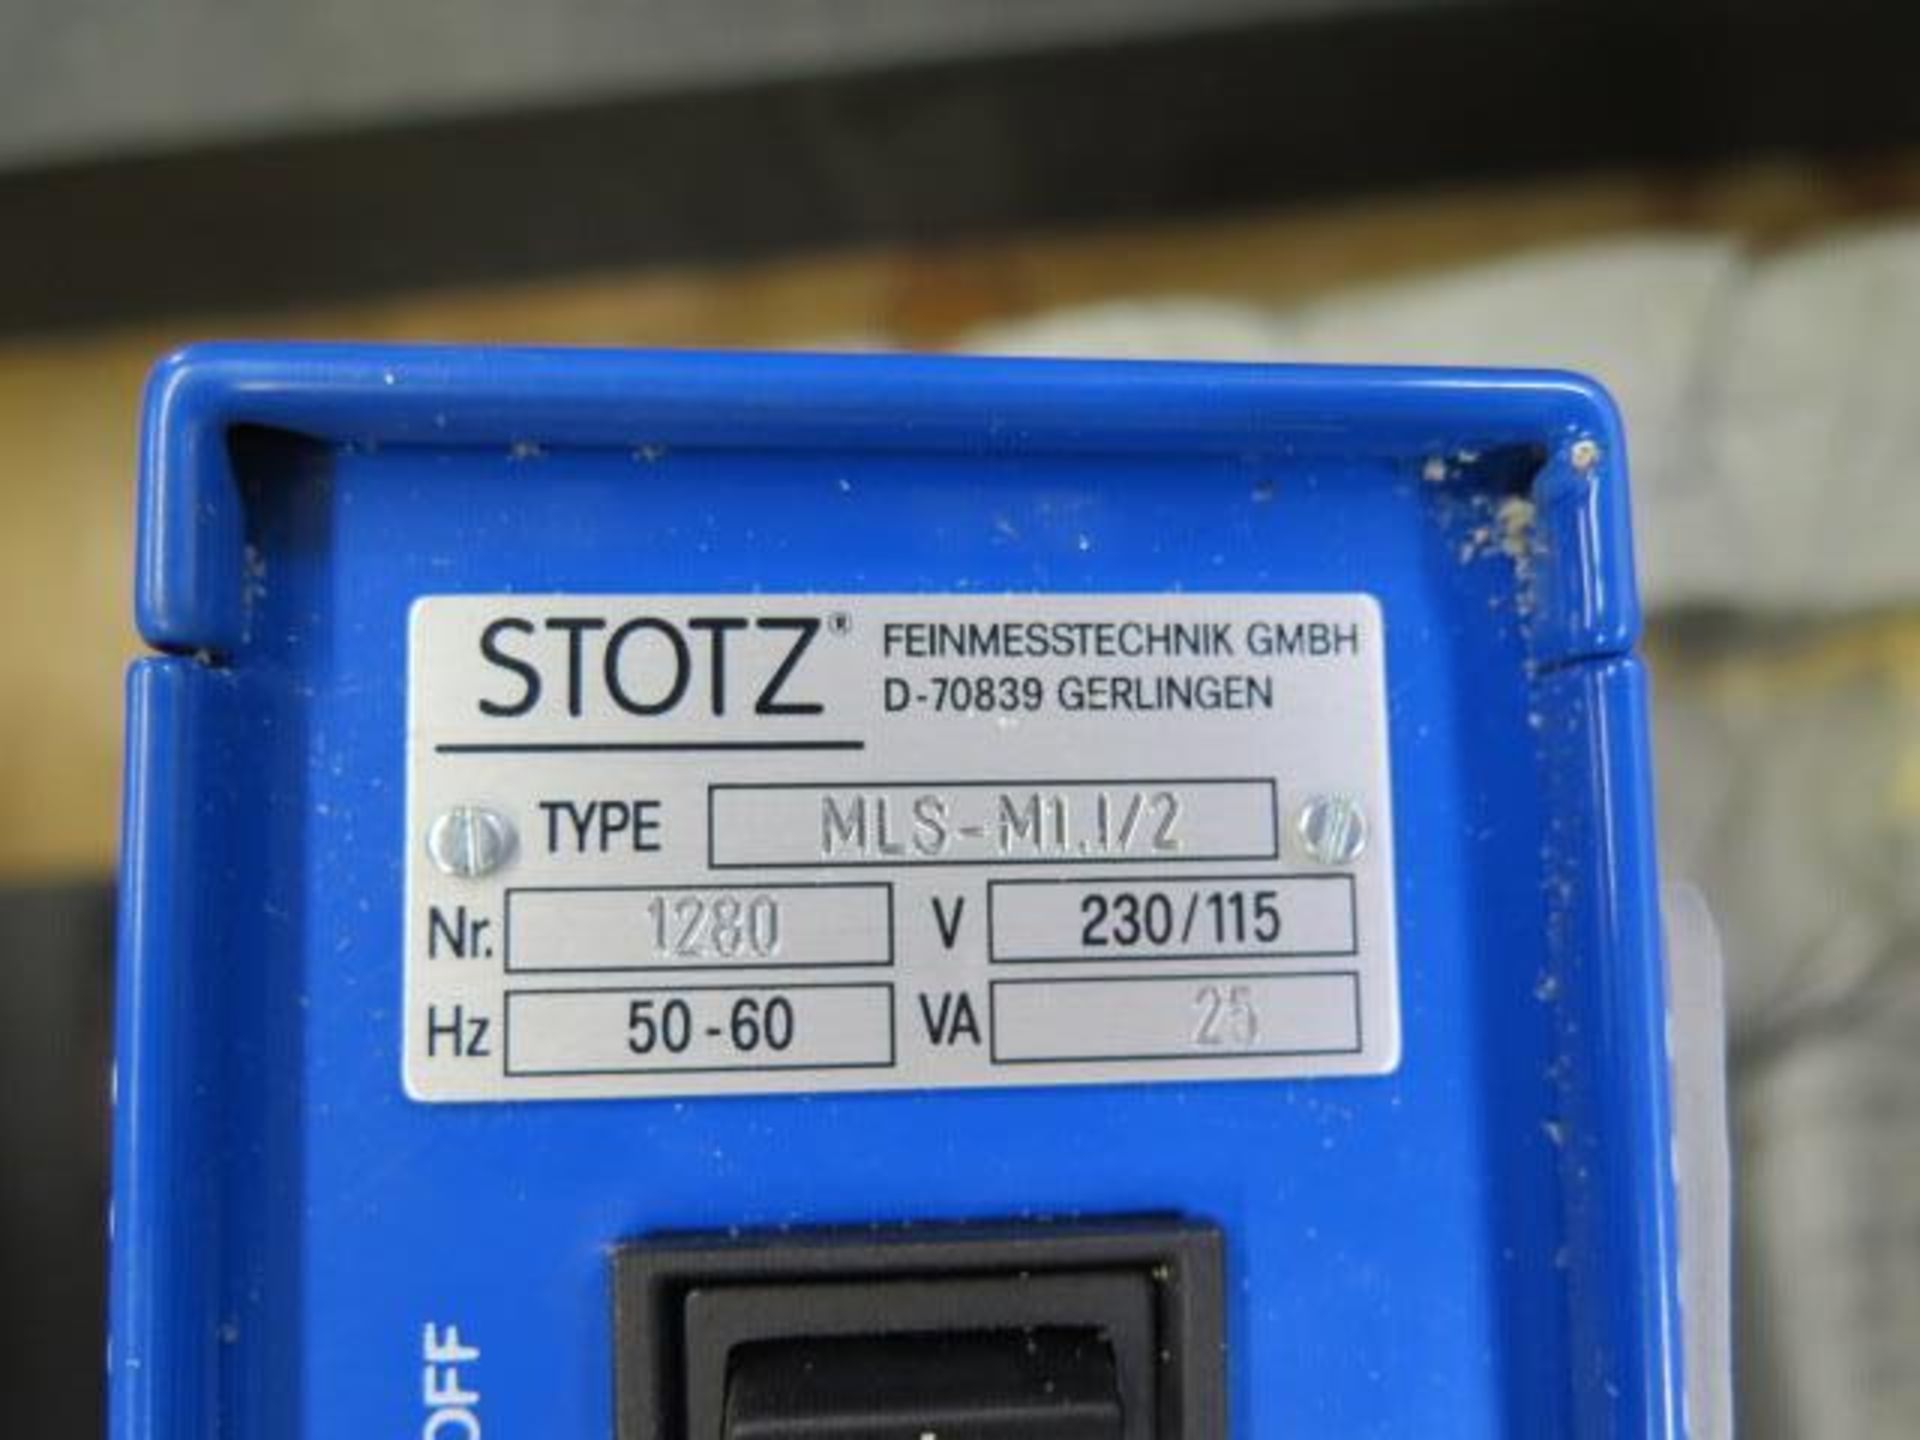 Stotz type MSG-64L-M1/2 Digital Air Gage (SOLD AS-IS - NO WARRANTY) - Image 6 of 6